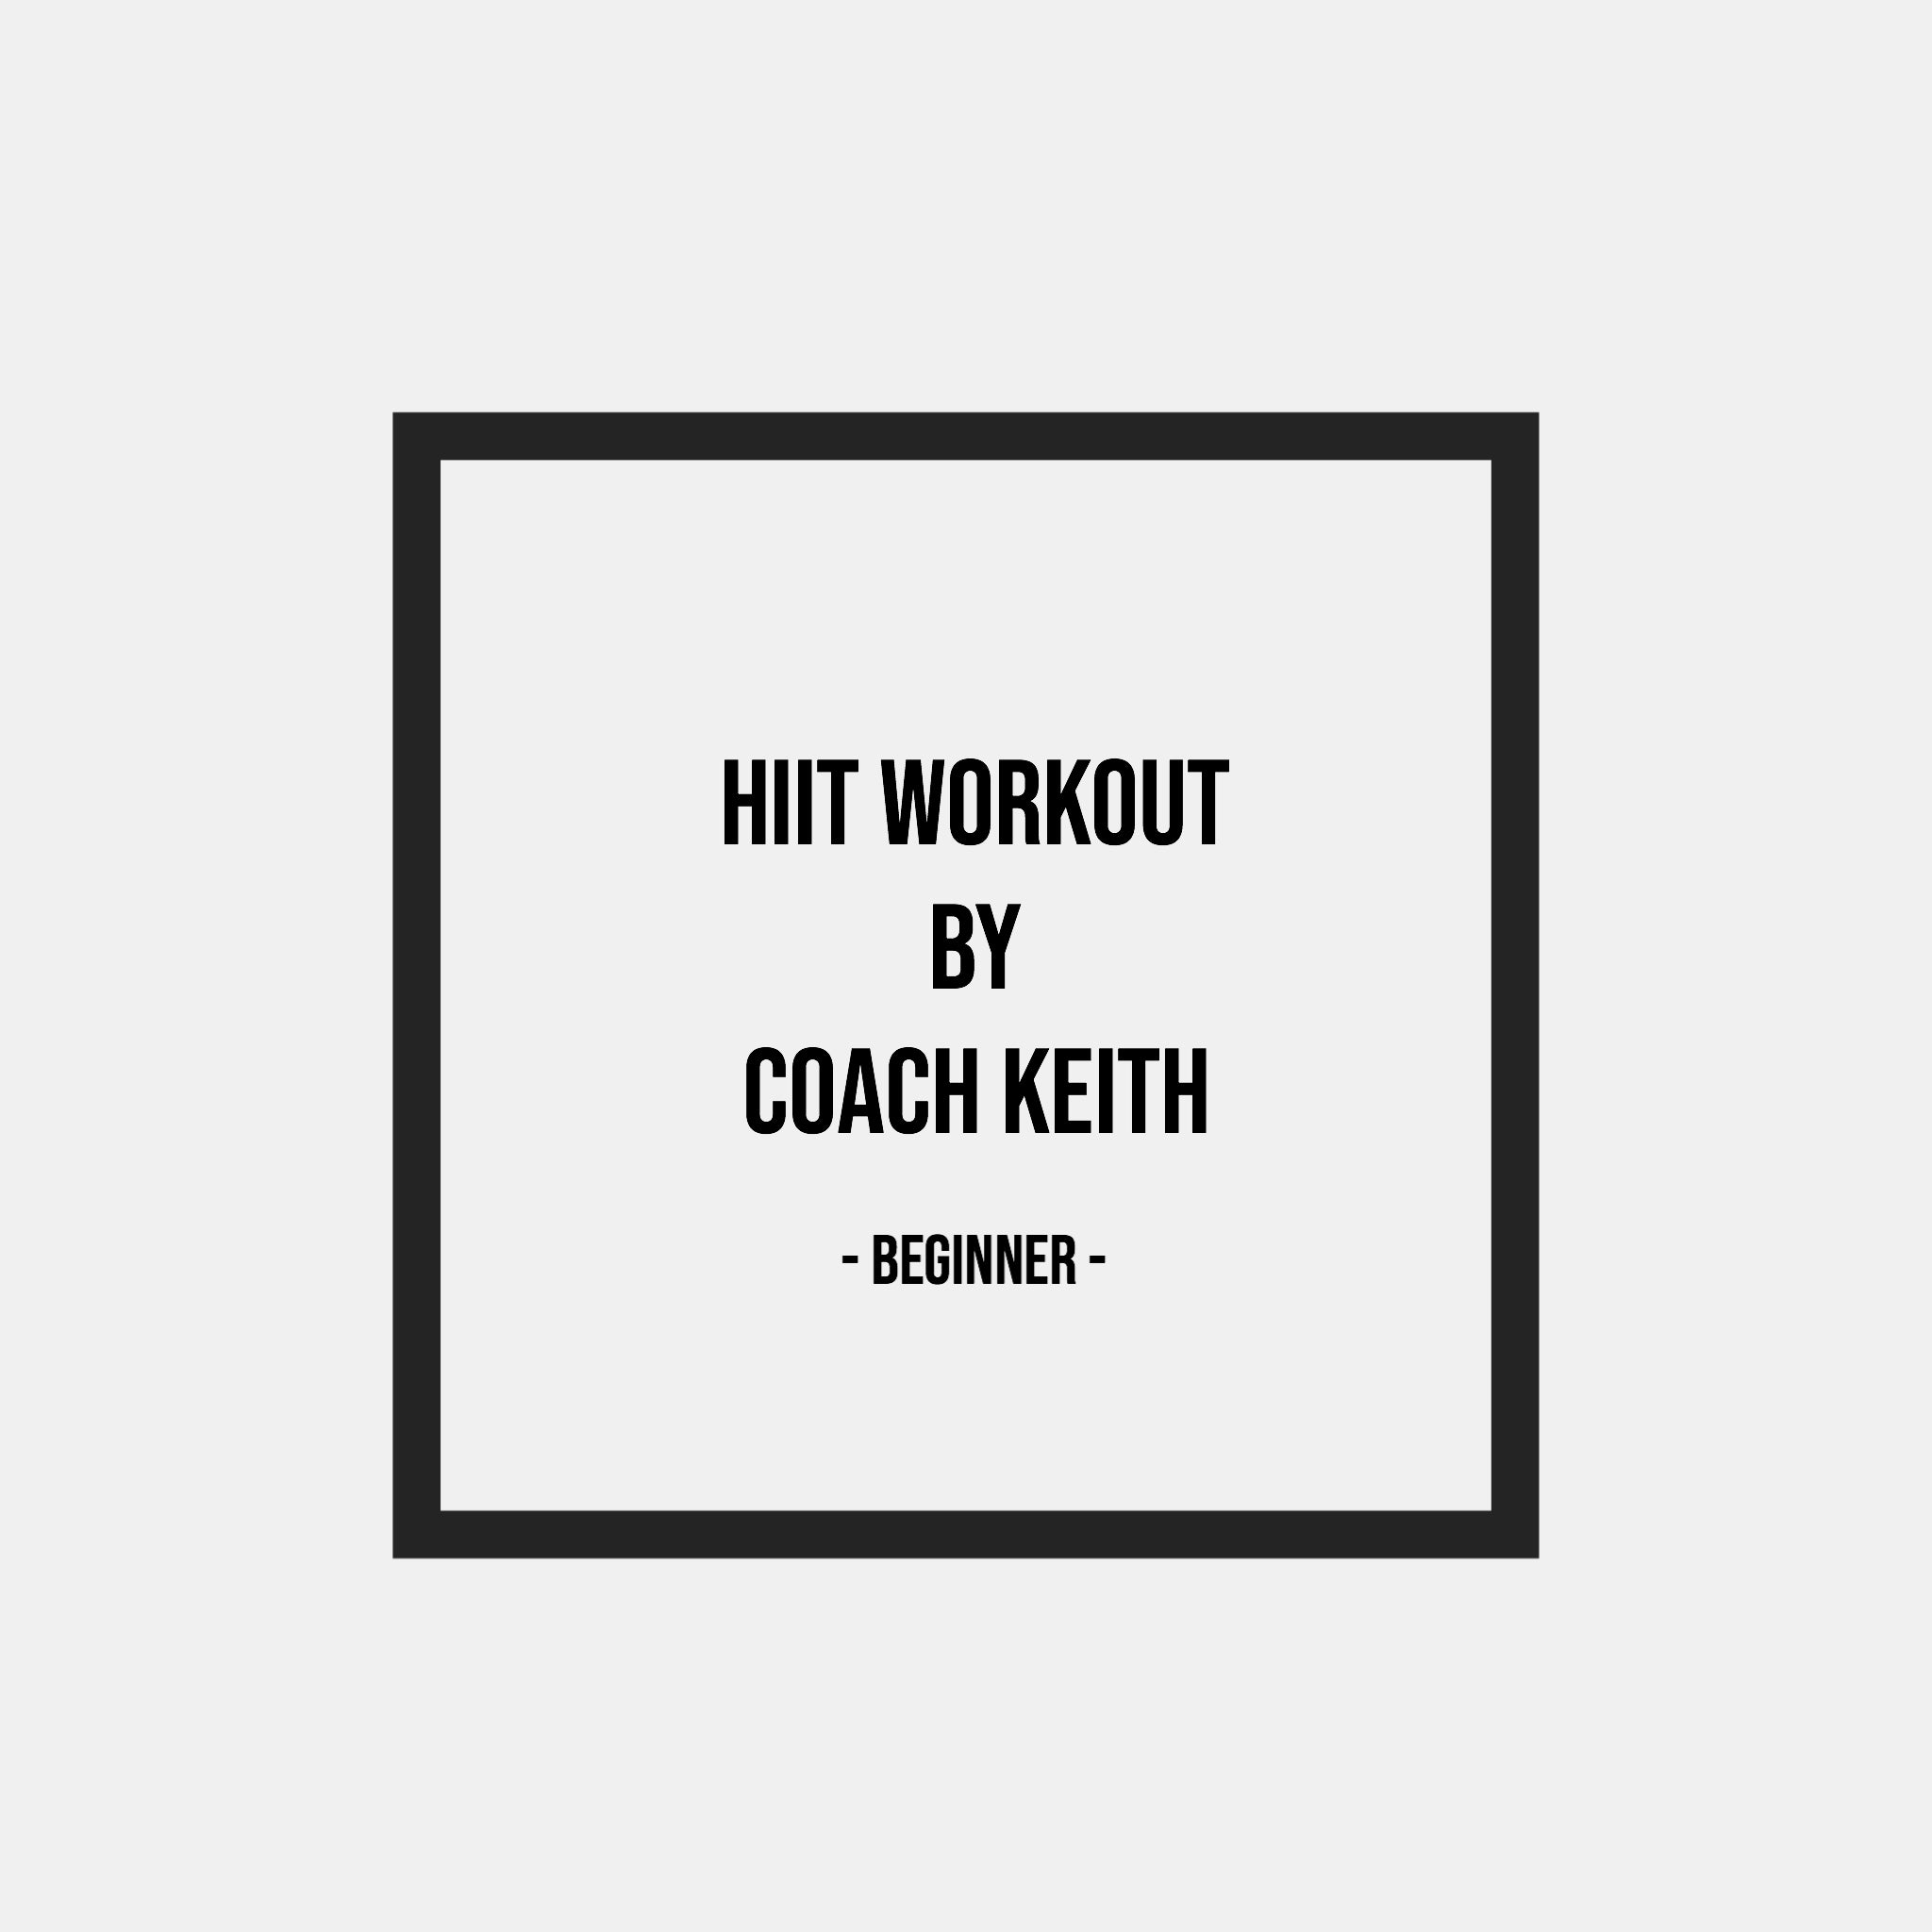 HIIT Workout By Coach Keith - Beginner